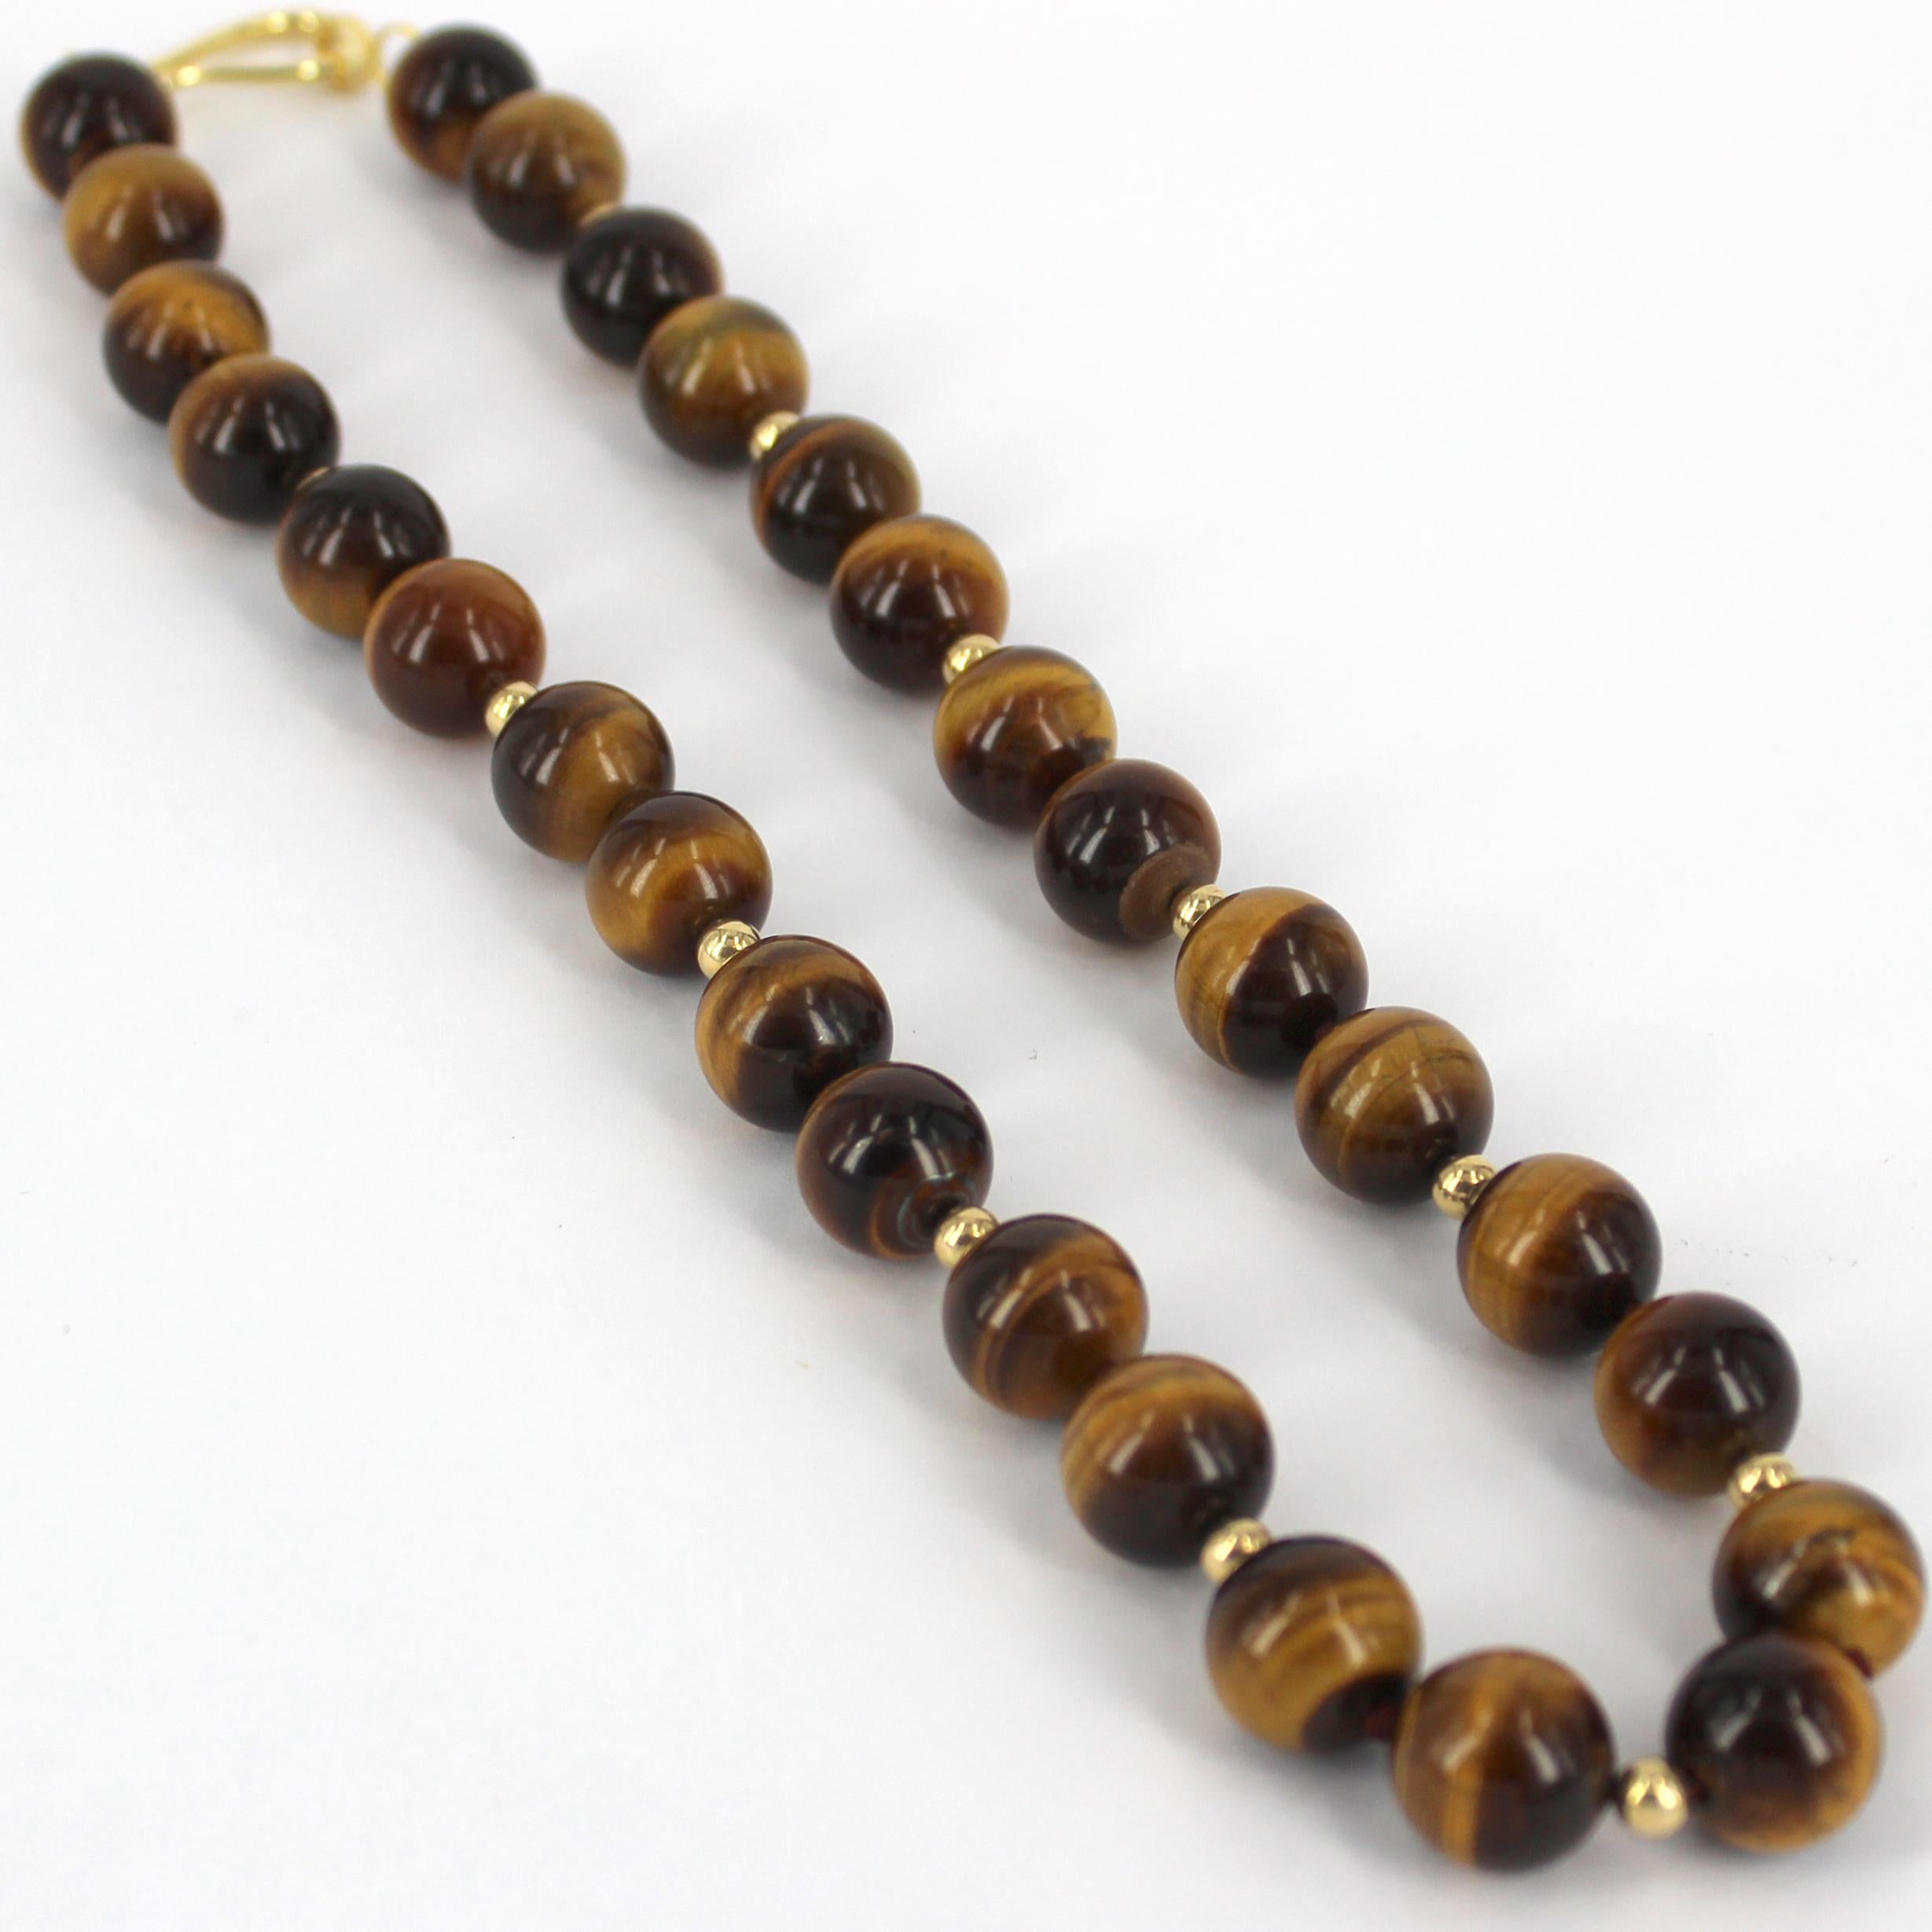 979.00 Cts Earth Mined Untreated Golden Tiger Eye Round Shape Beads Necklace 